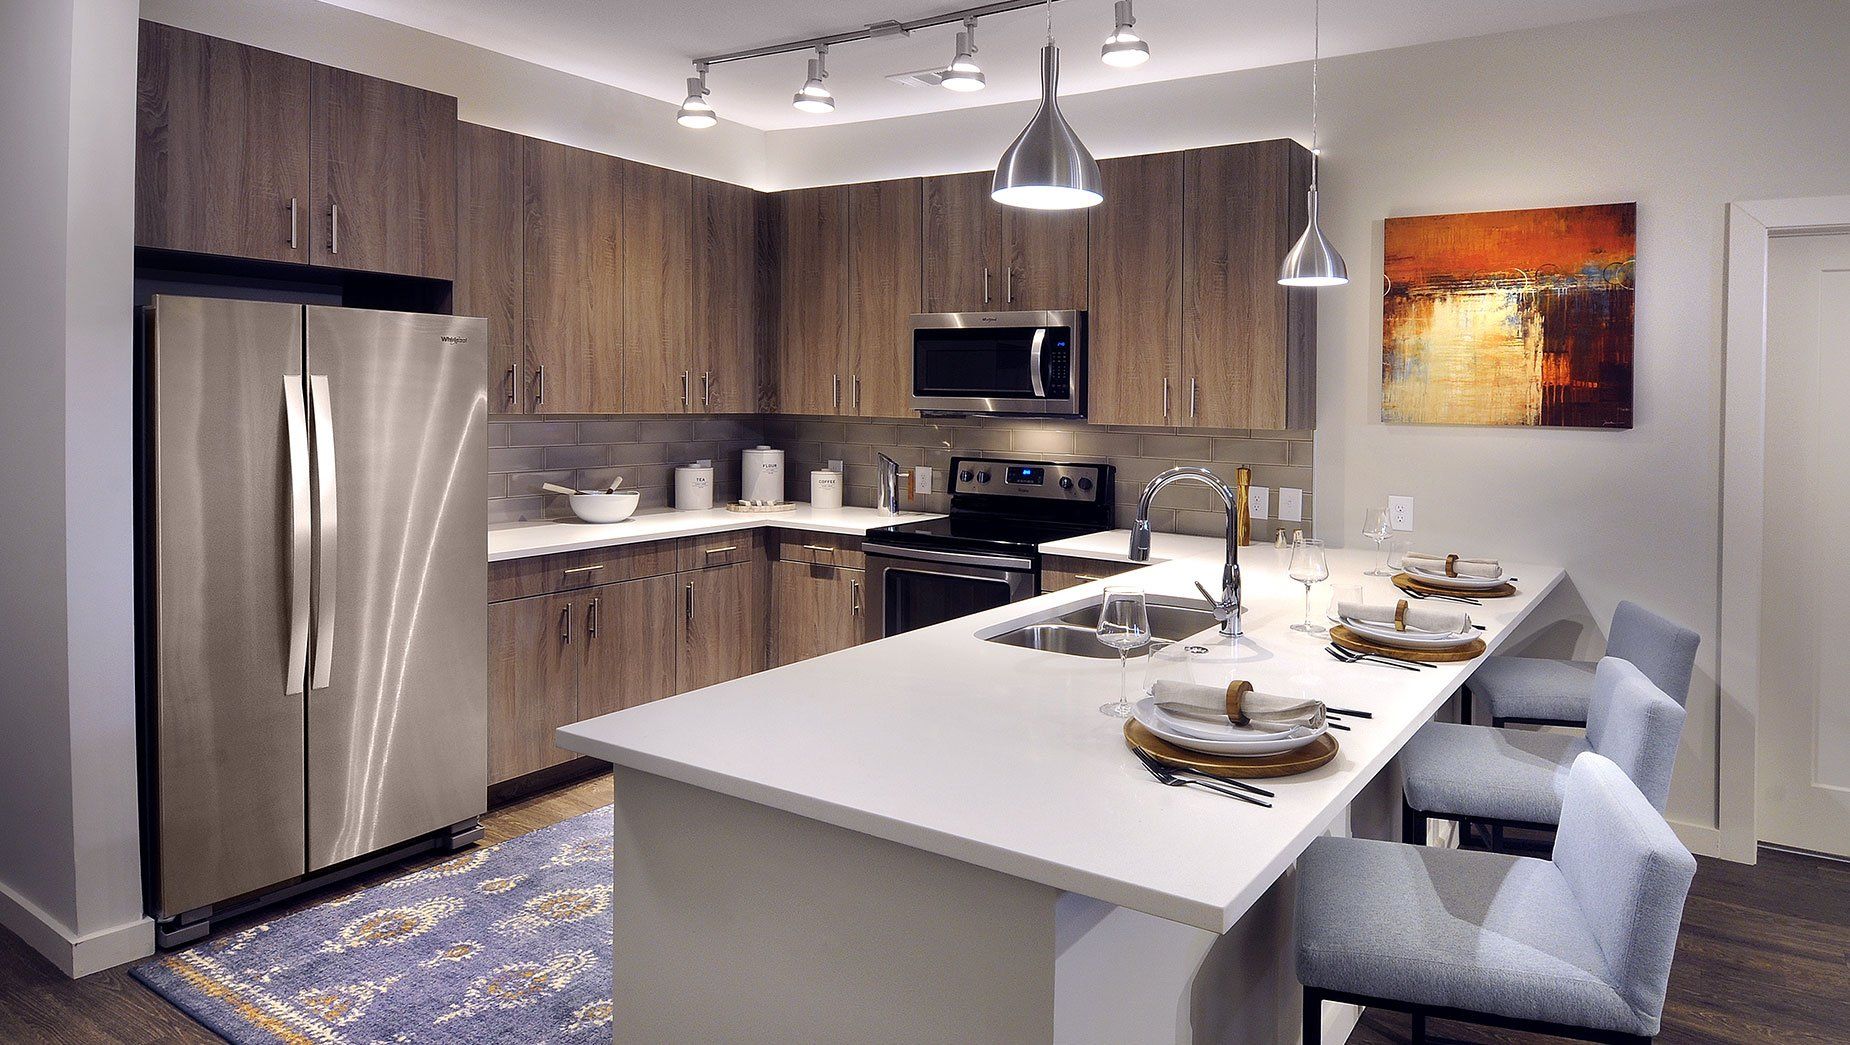 Apartment Luxury Kitchen with Quartz Countertops at North and Line